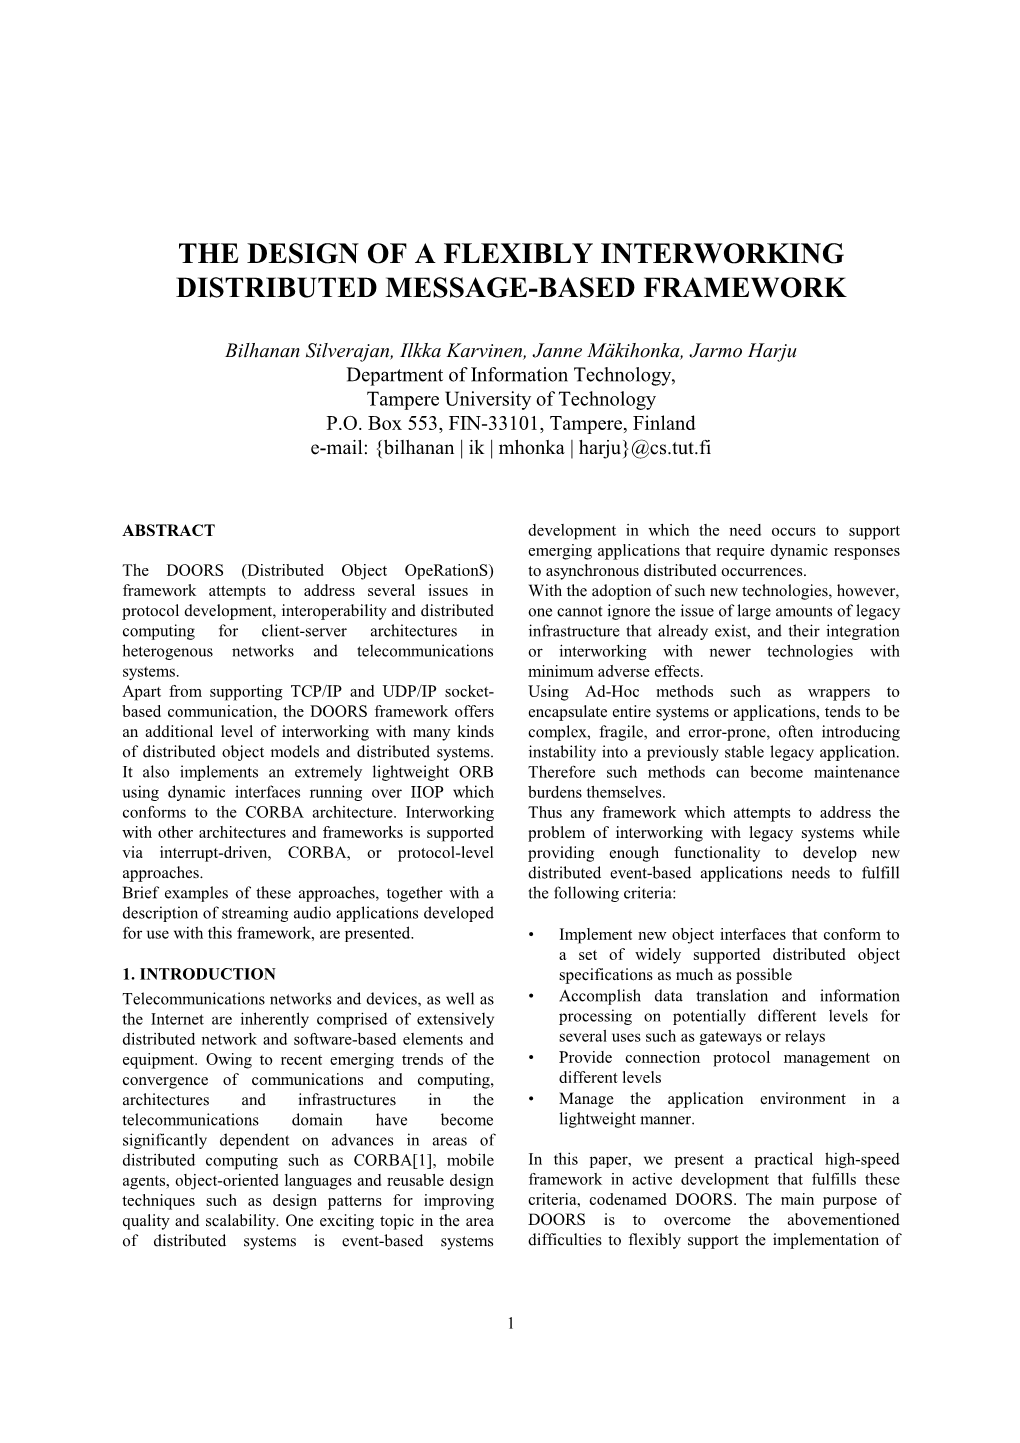 The Design of a Flexibly Interworking Distributed Message-Based Framework